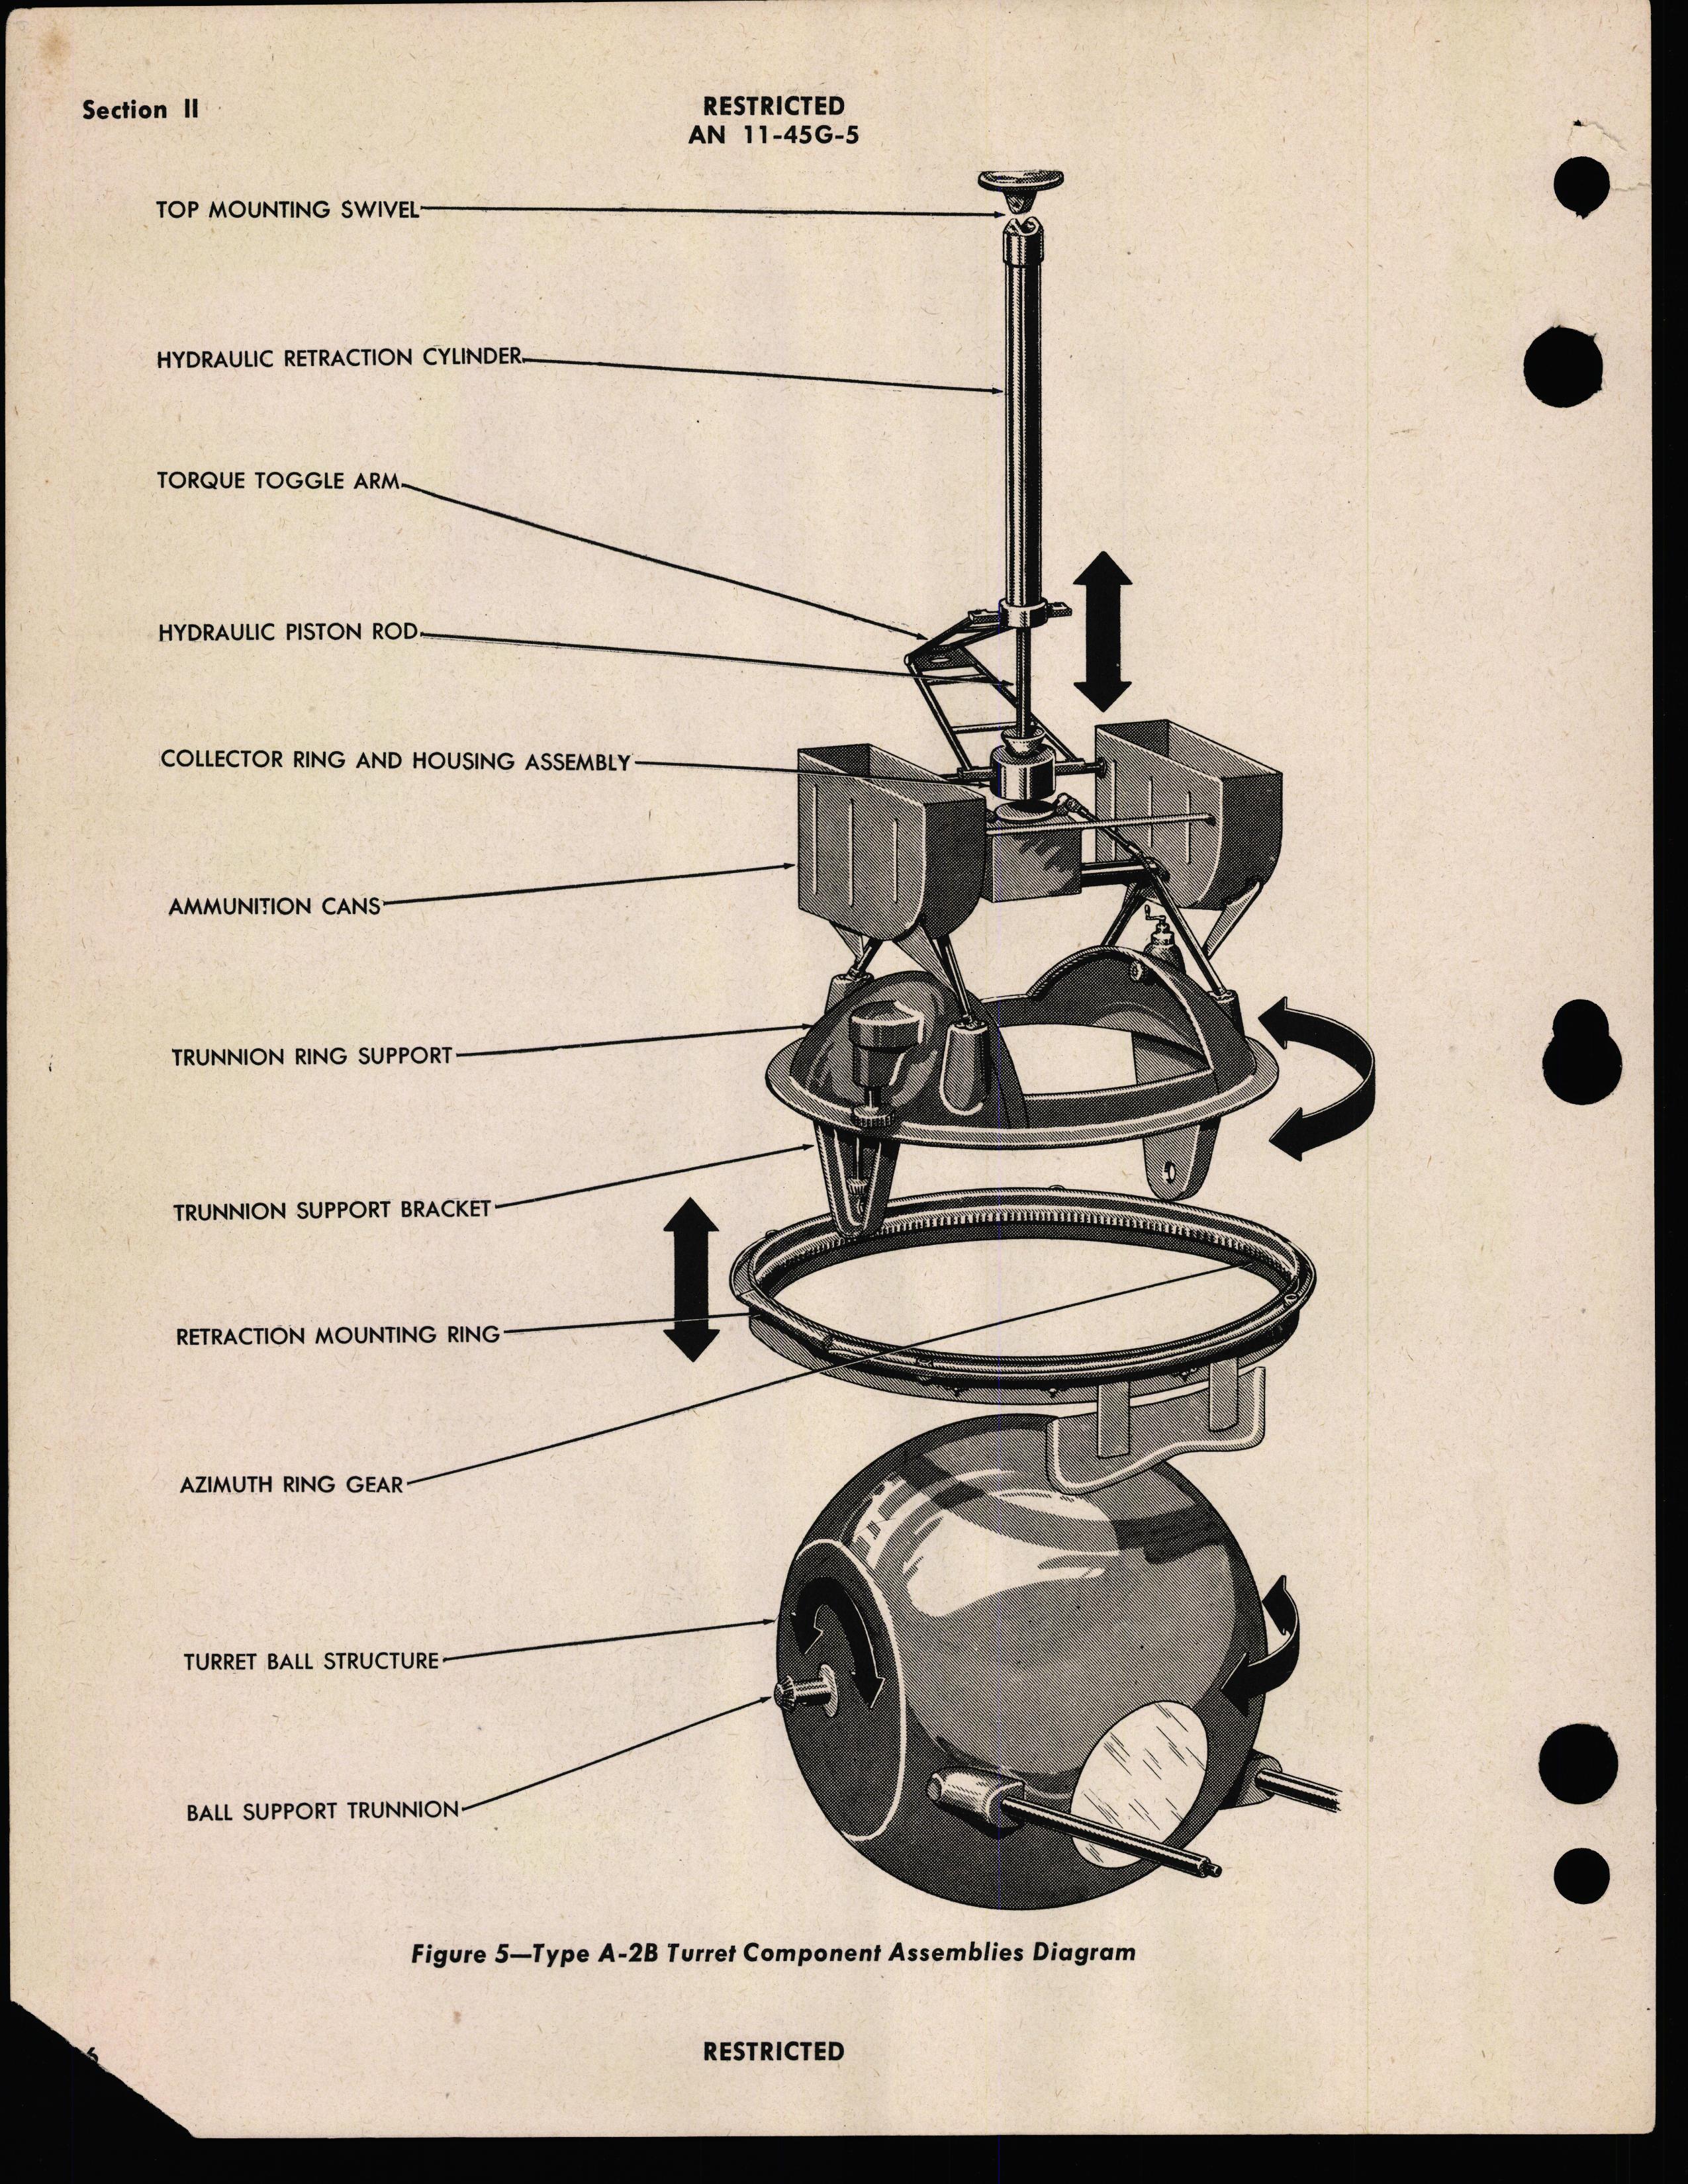 Sample page 10 from AirCorps Library document: Handbook of Instruction with Parts Catalog for Lower Ball Turrets